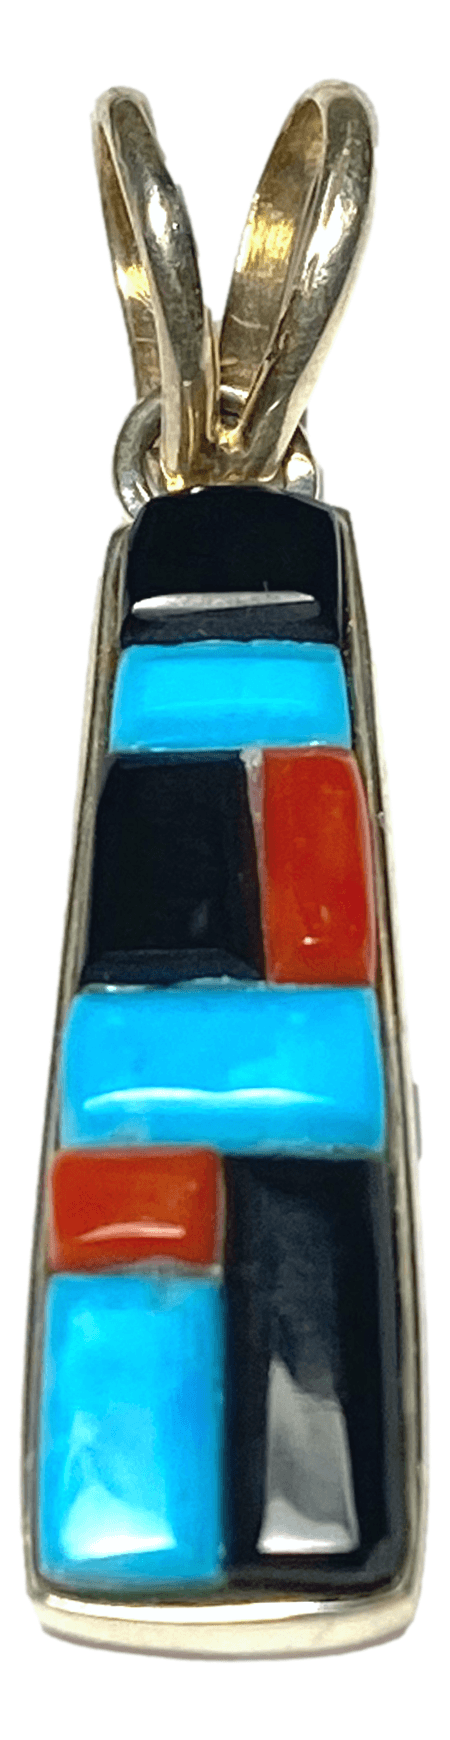 Pendant Sterling Silver Rectangular Turquoise Jet Coral Inlay Handcrafted by New Mexico Artisan 1 5/8 L x 3/8 W inches - Ysleta Mission Gift Shop- VOTED El Paso's Best Gift Shop